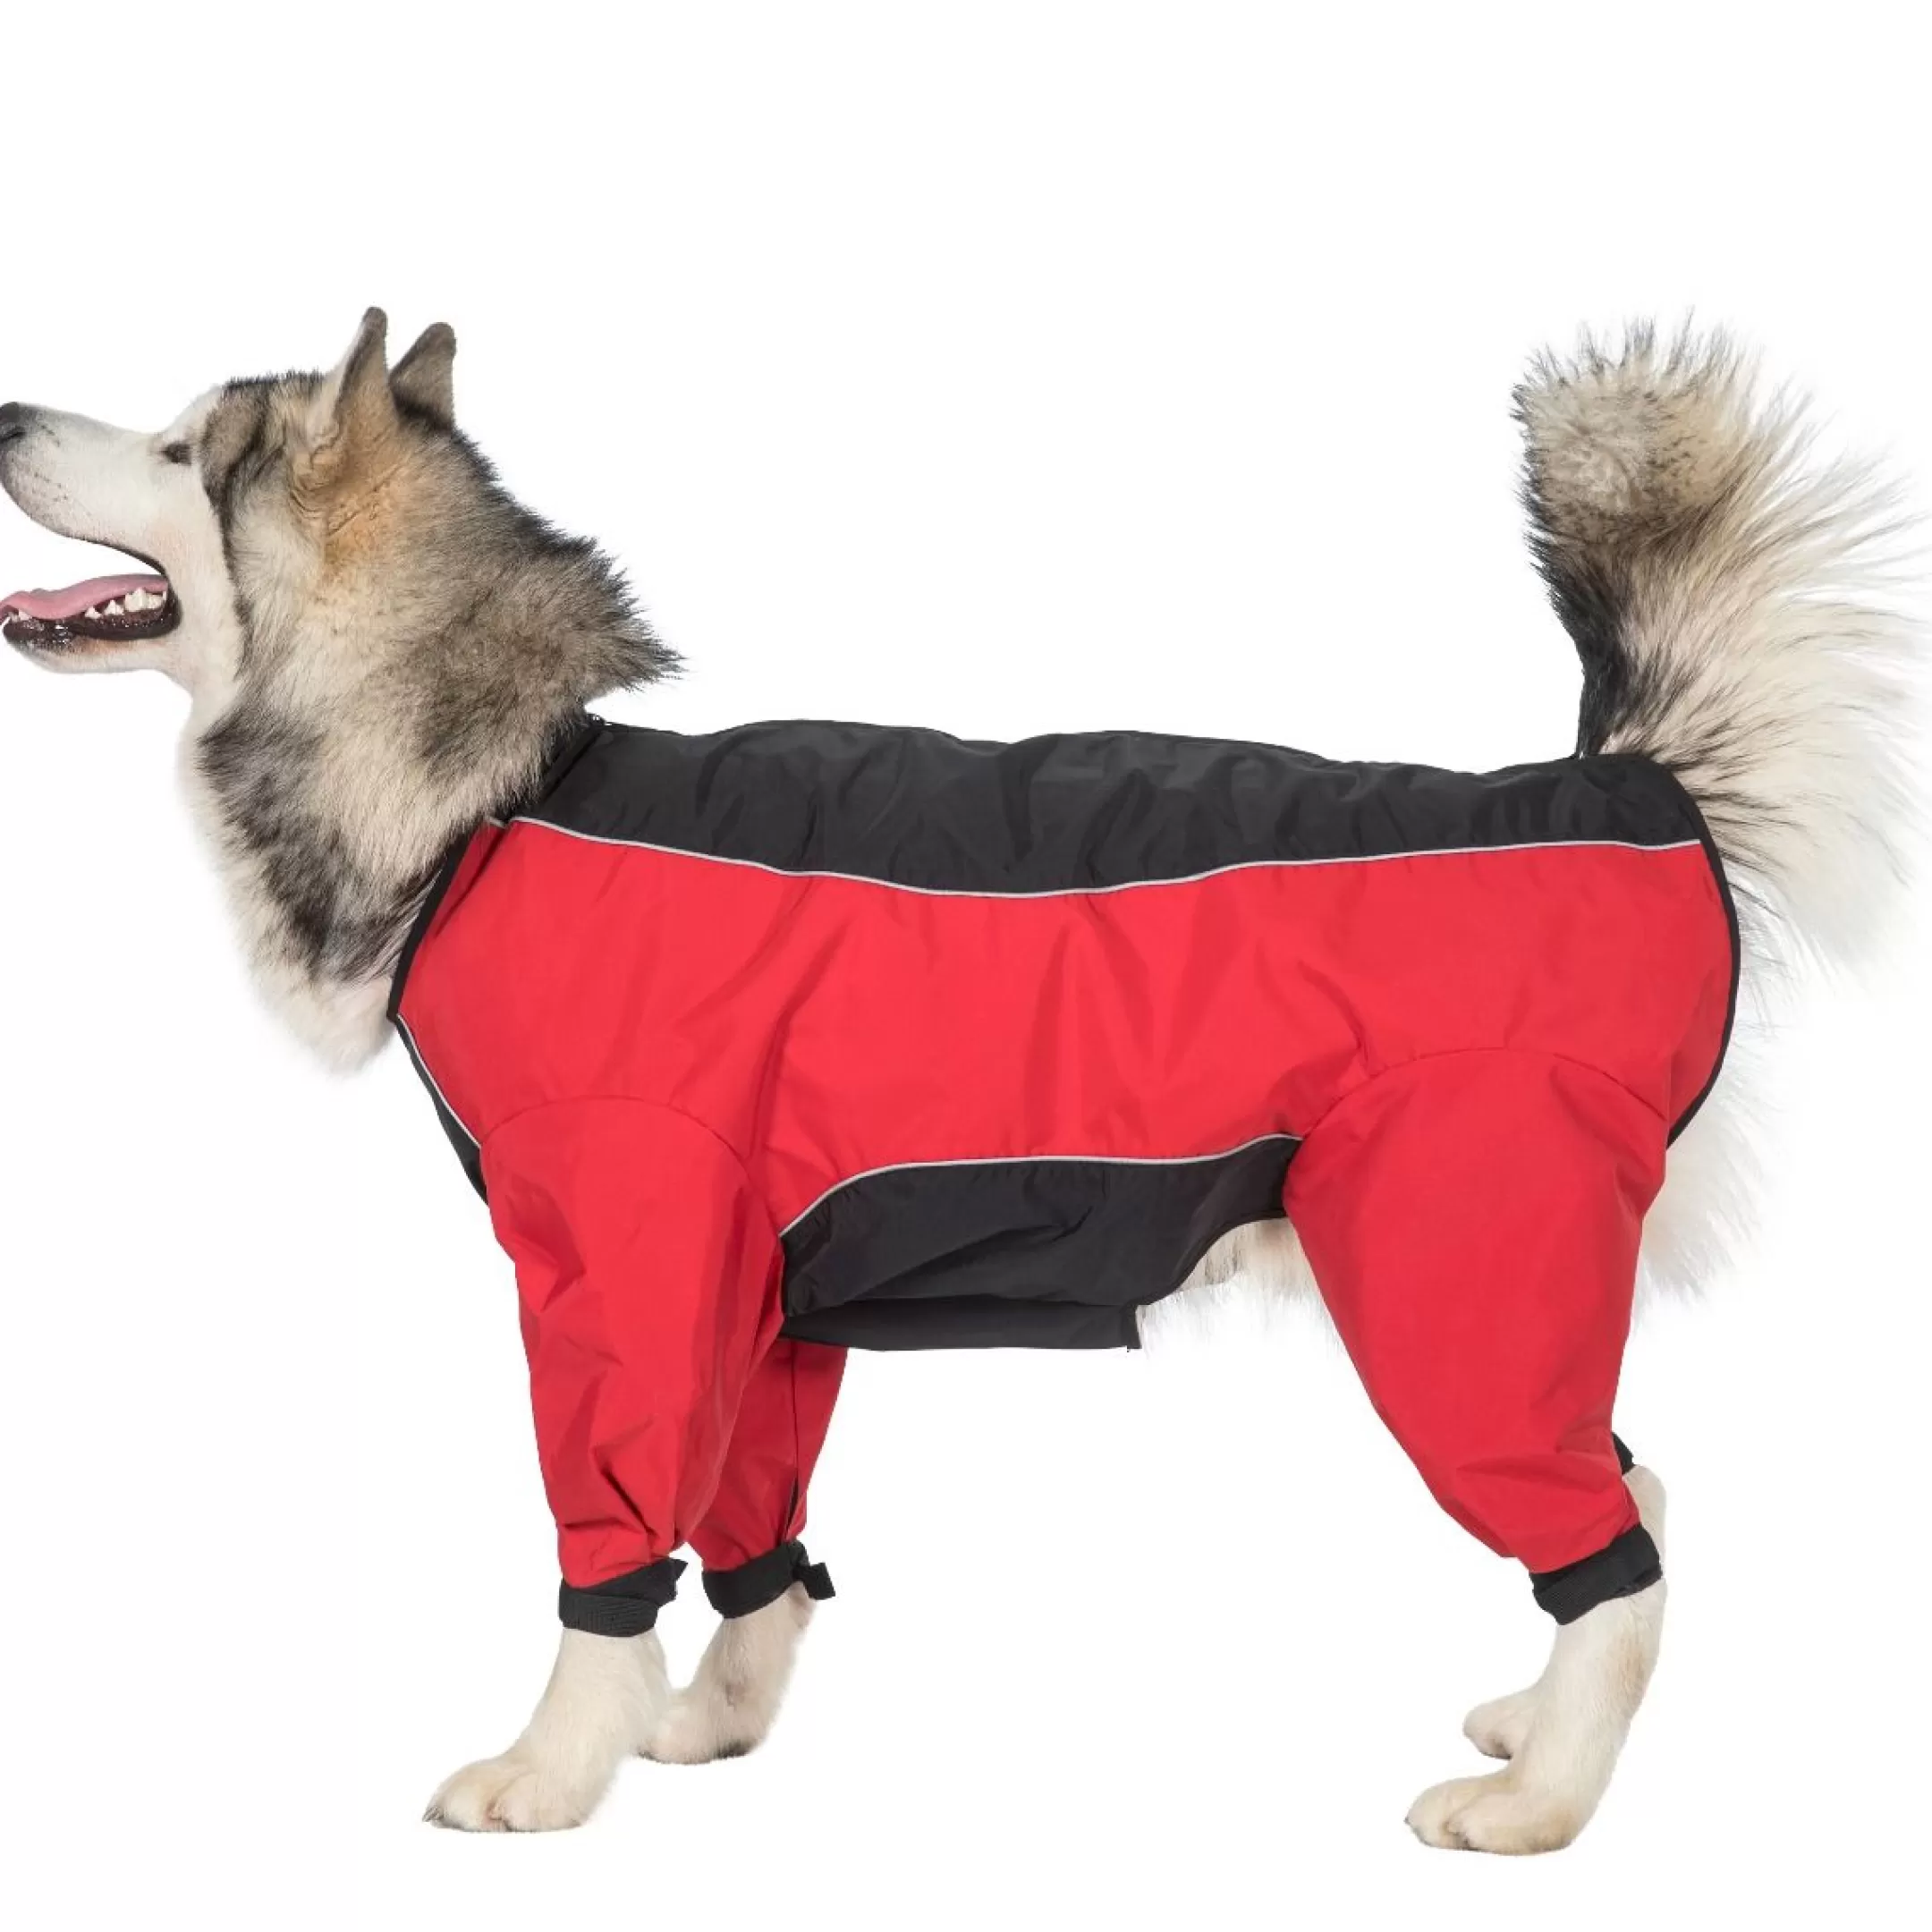 Trespaws XL Windproof Dog Coat with Leg Covers in Red Tia | Trespass Cheap